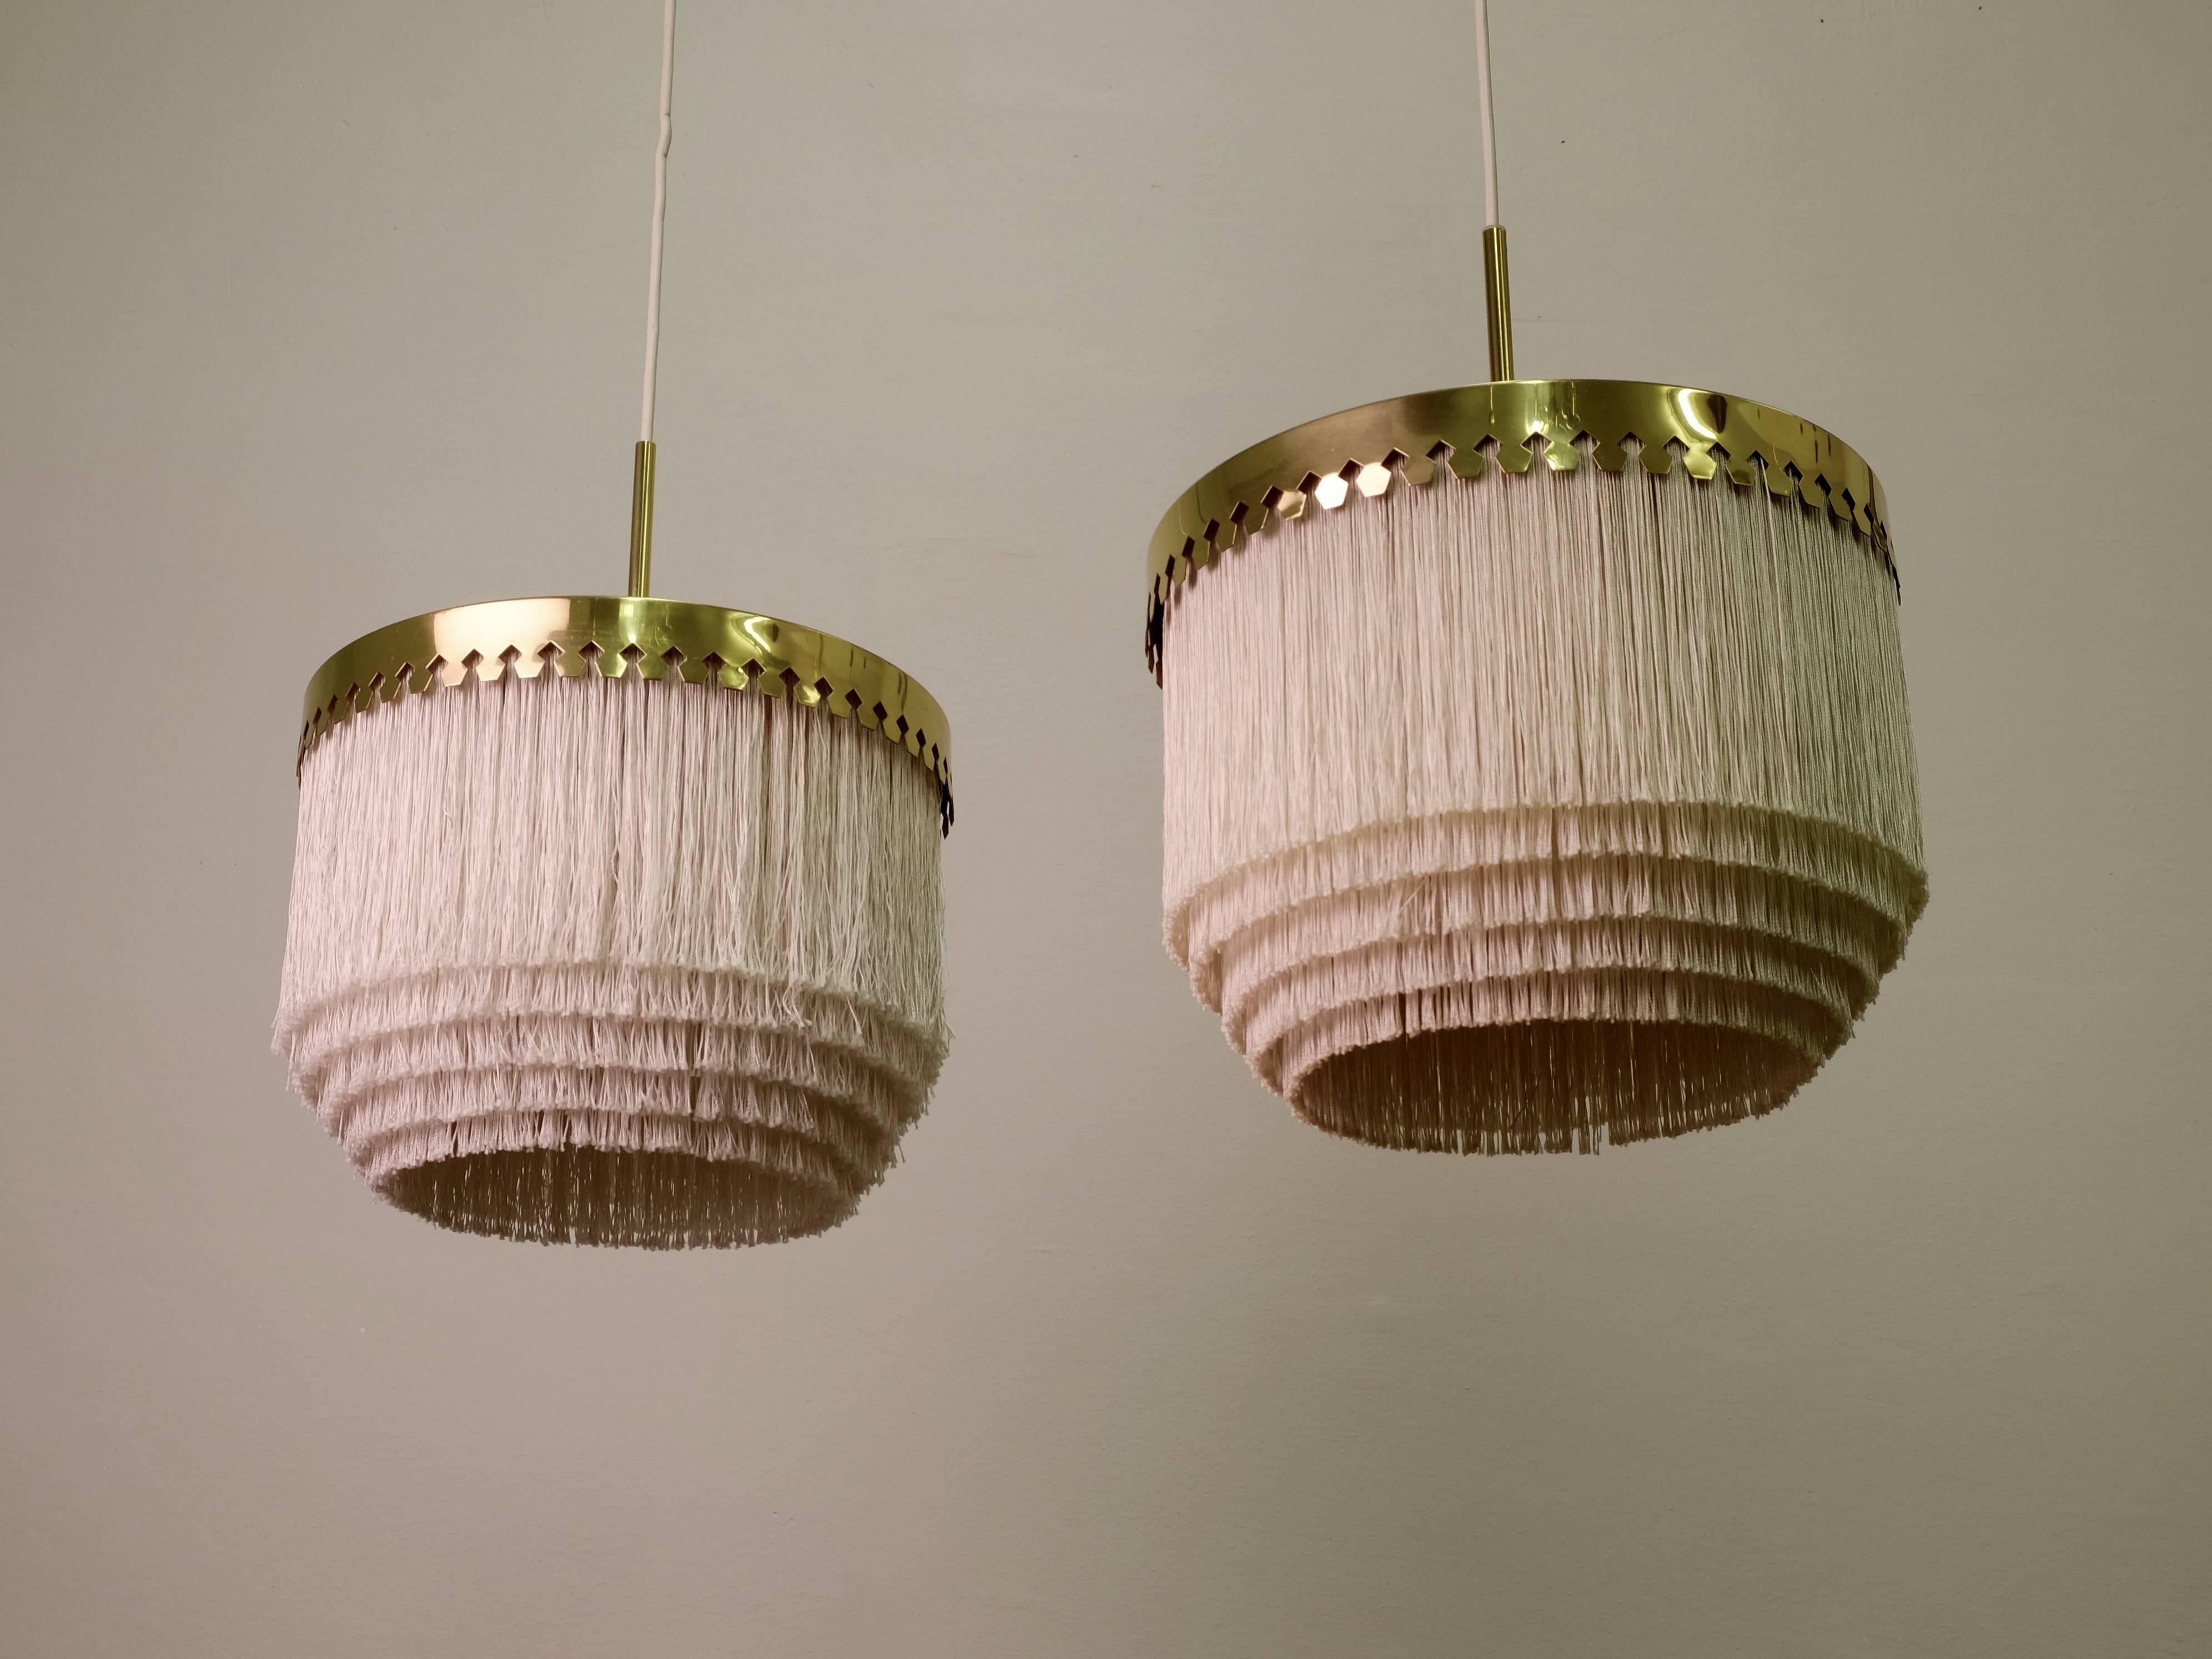 White fringes and brass.
Produced by Hans-Agne Jakobsson, Markaryd, Sweden, 1960s.
Height is adjustable.